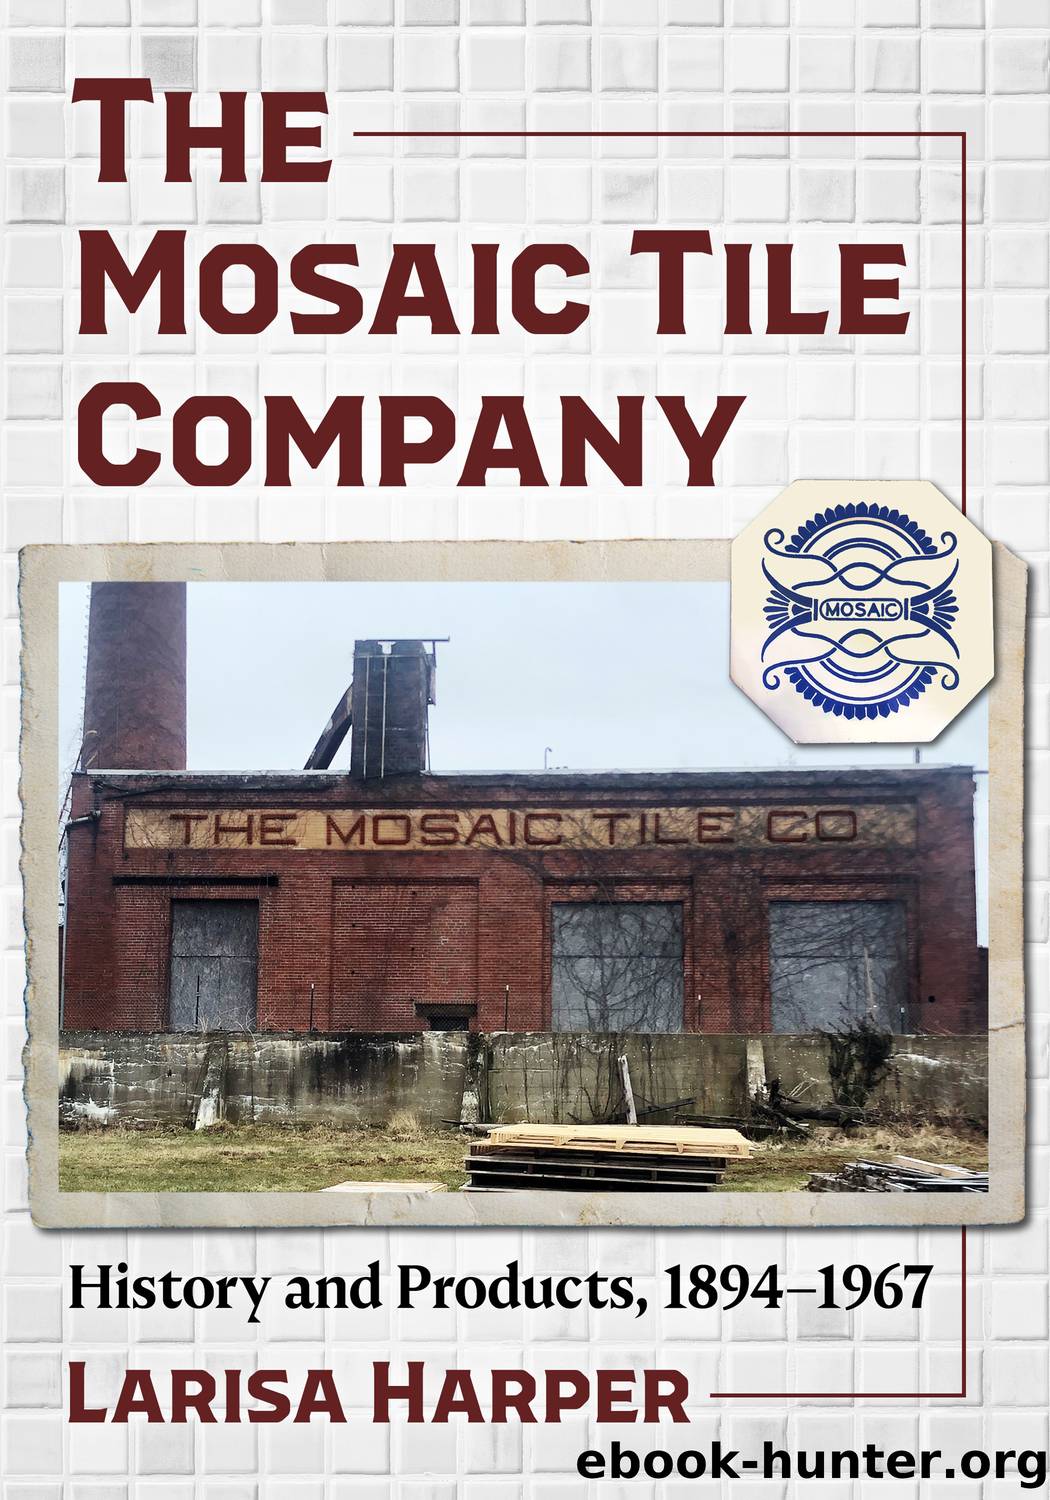 The Mosaic Tile Company by Larisa Harper